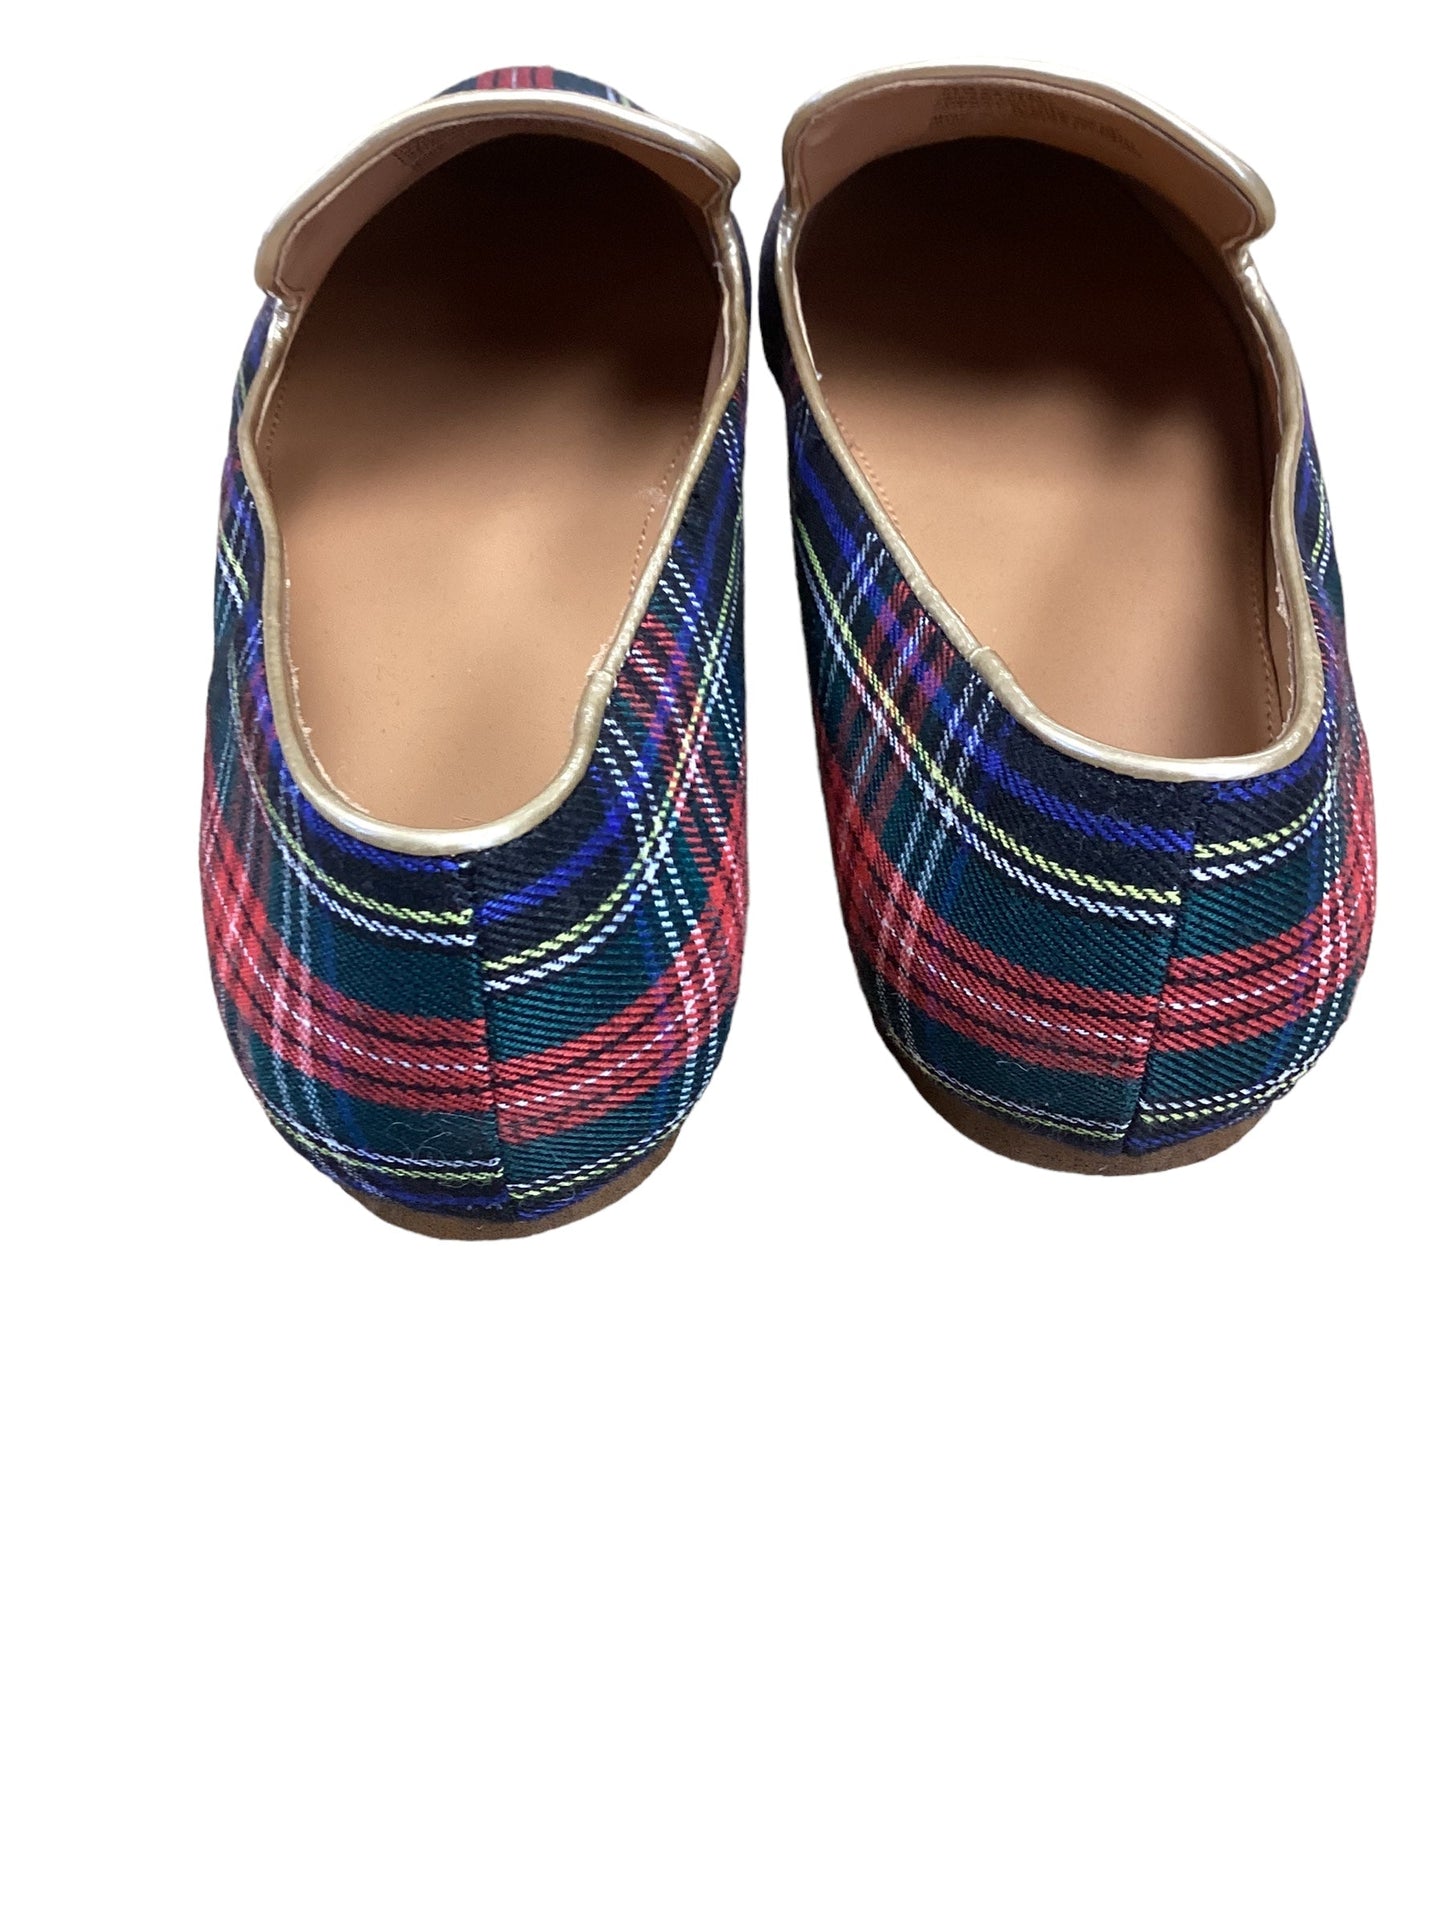 Multi-colored Shoes Flats J. Crew, Size 9